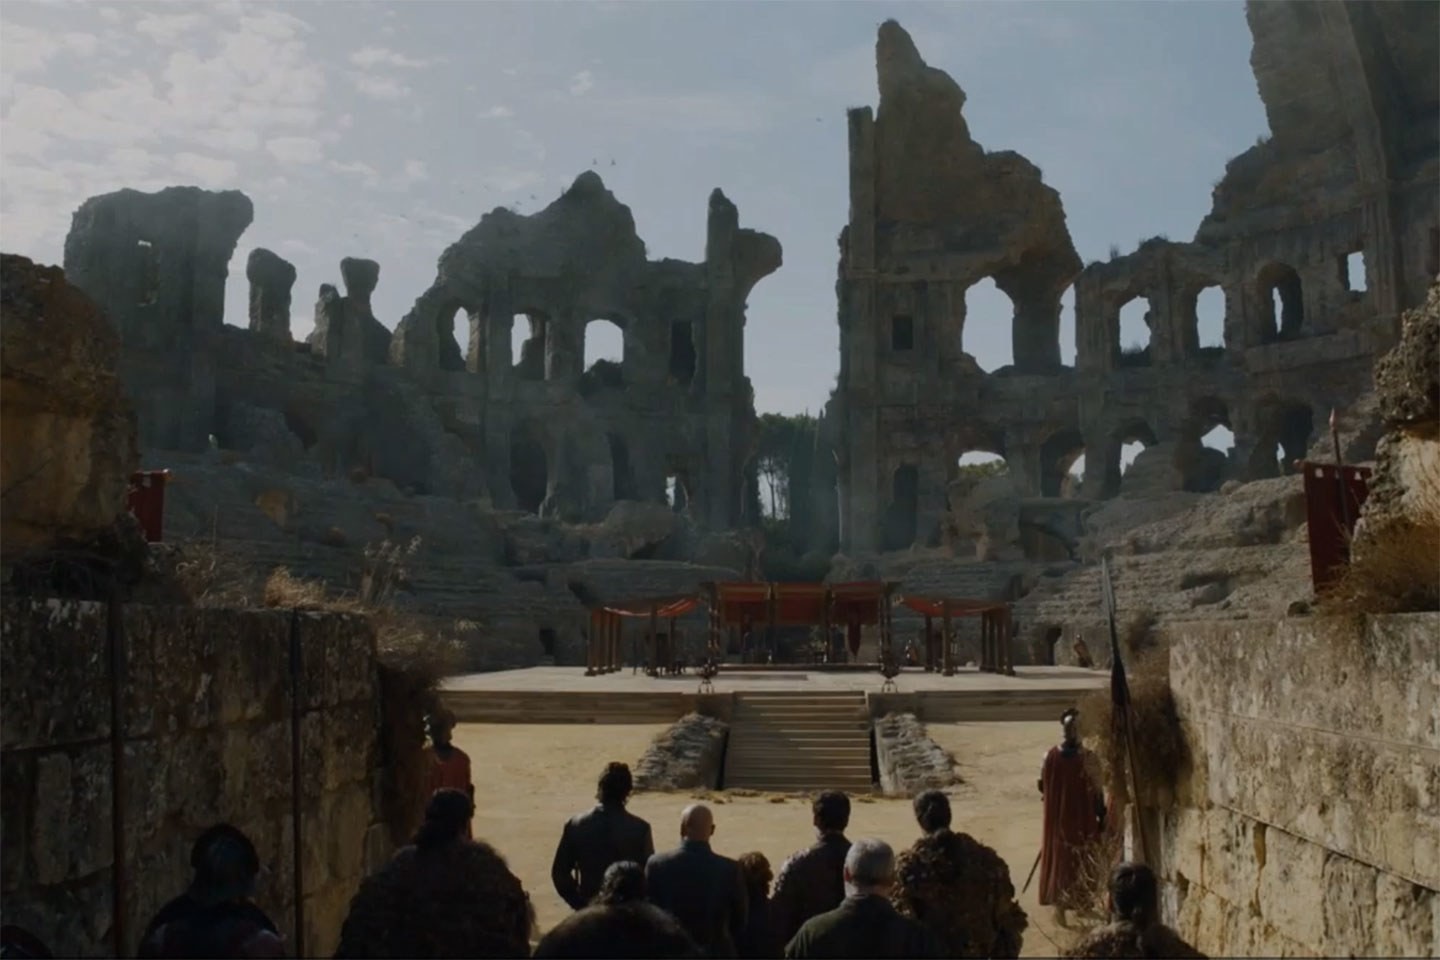 screengrab of how the dome looks in the episode, if i find a higher res image i'll put it up!